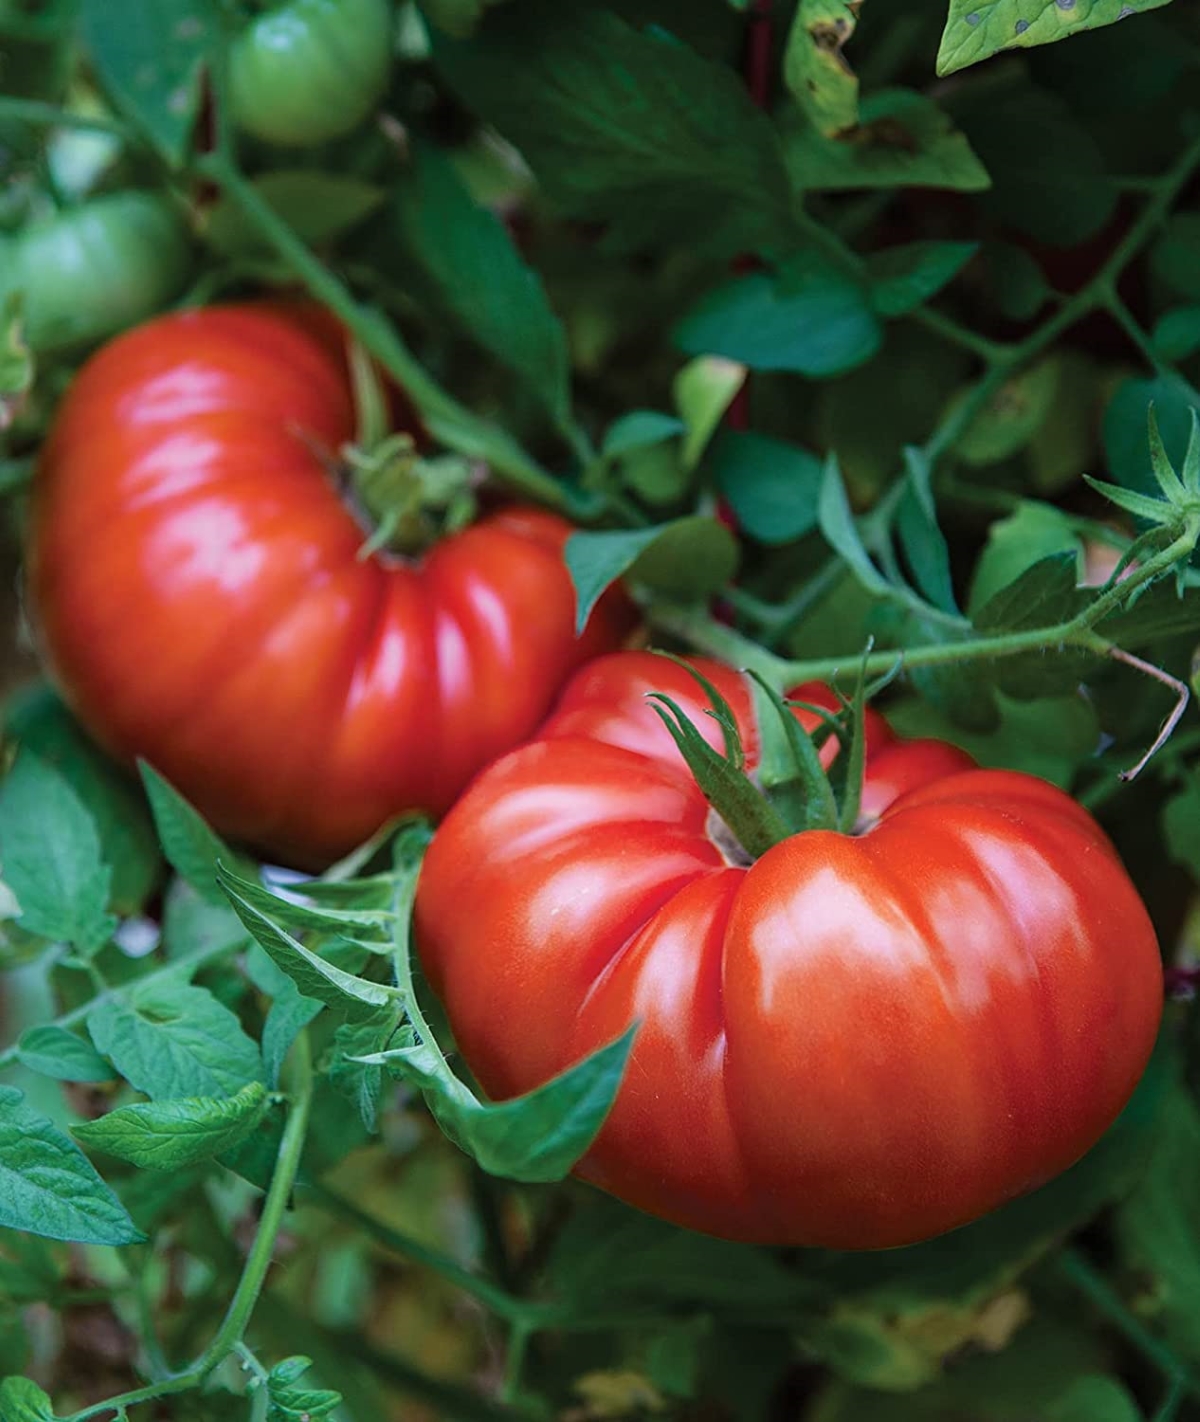 types of tomatoes - two large red tomatoes on vine